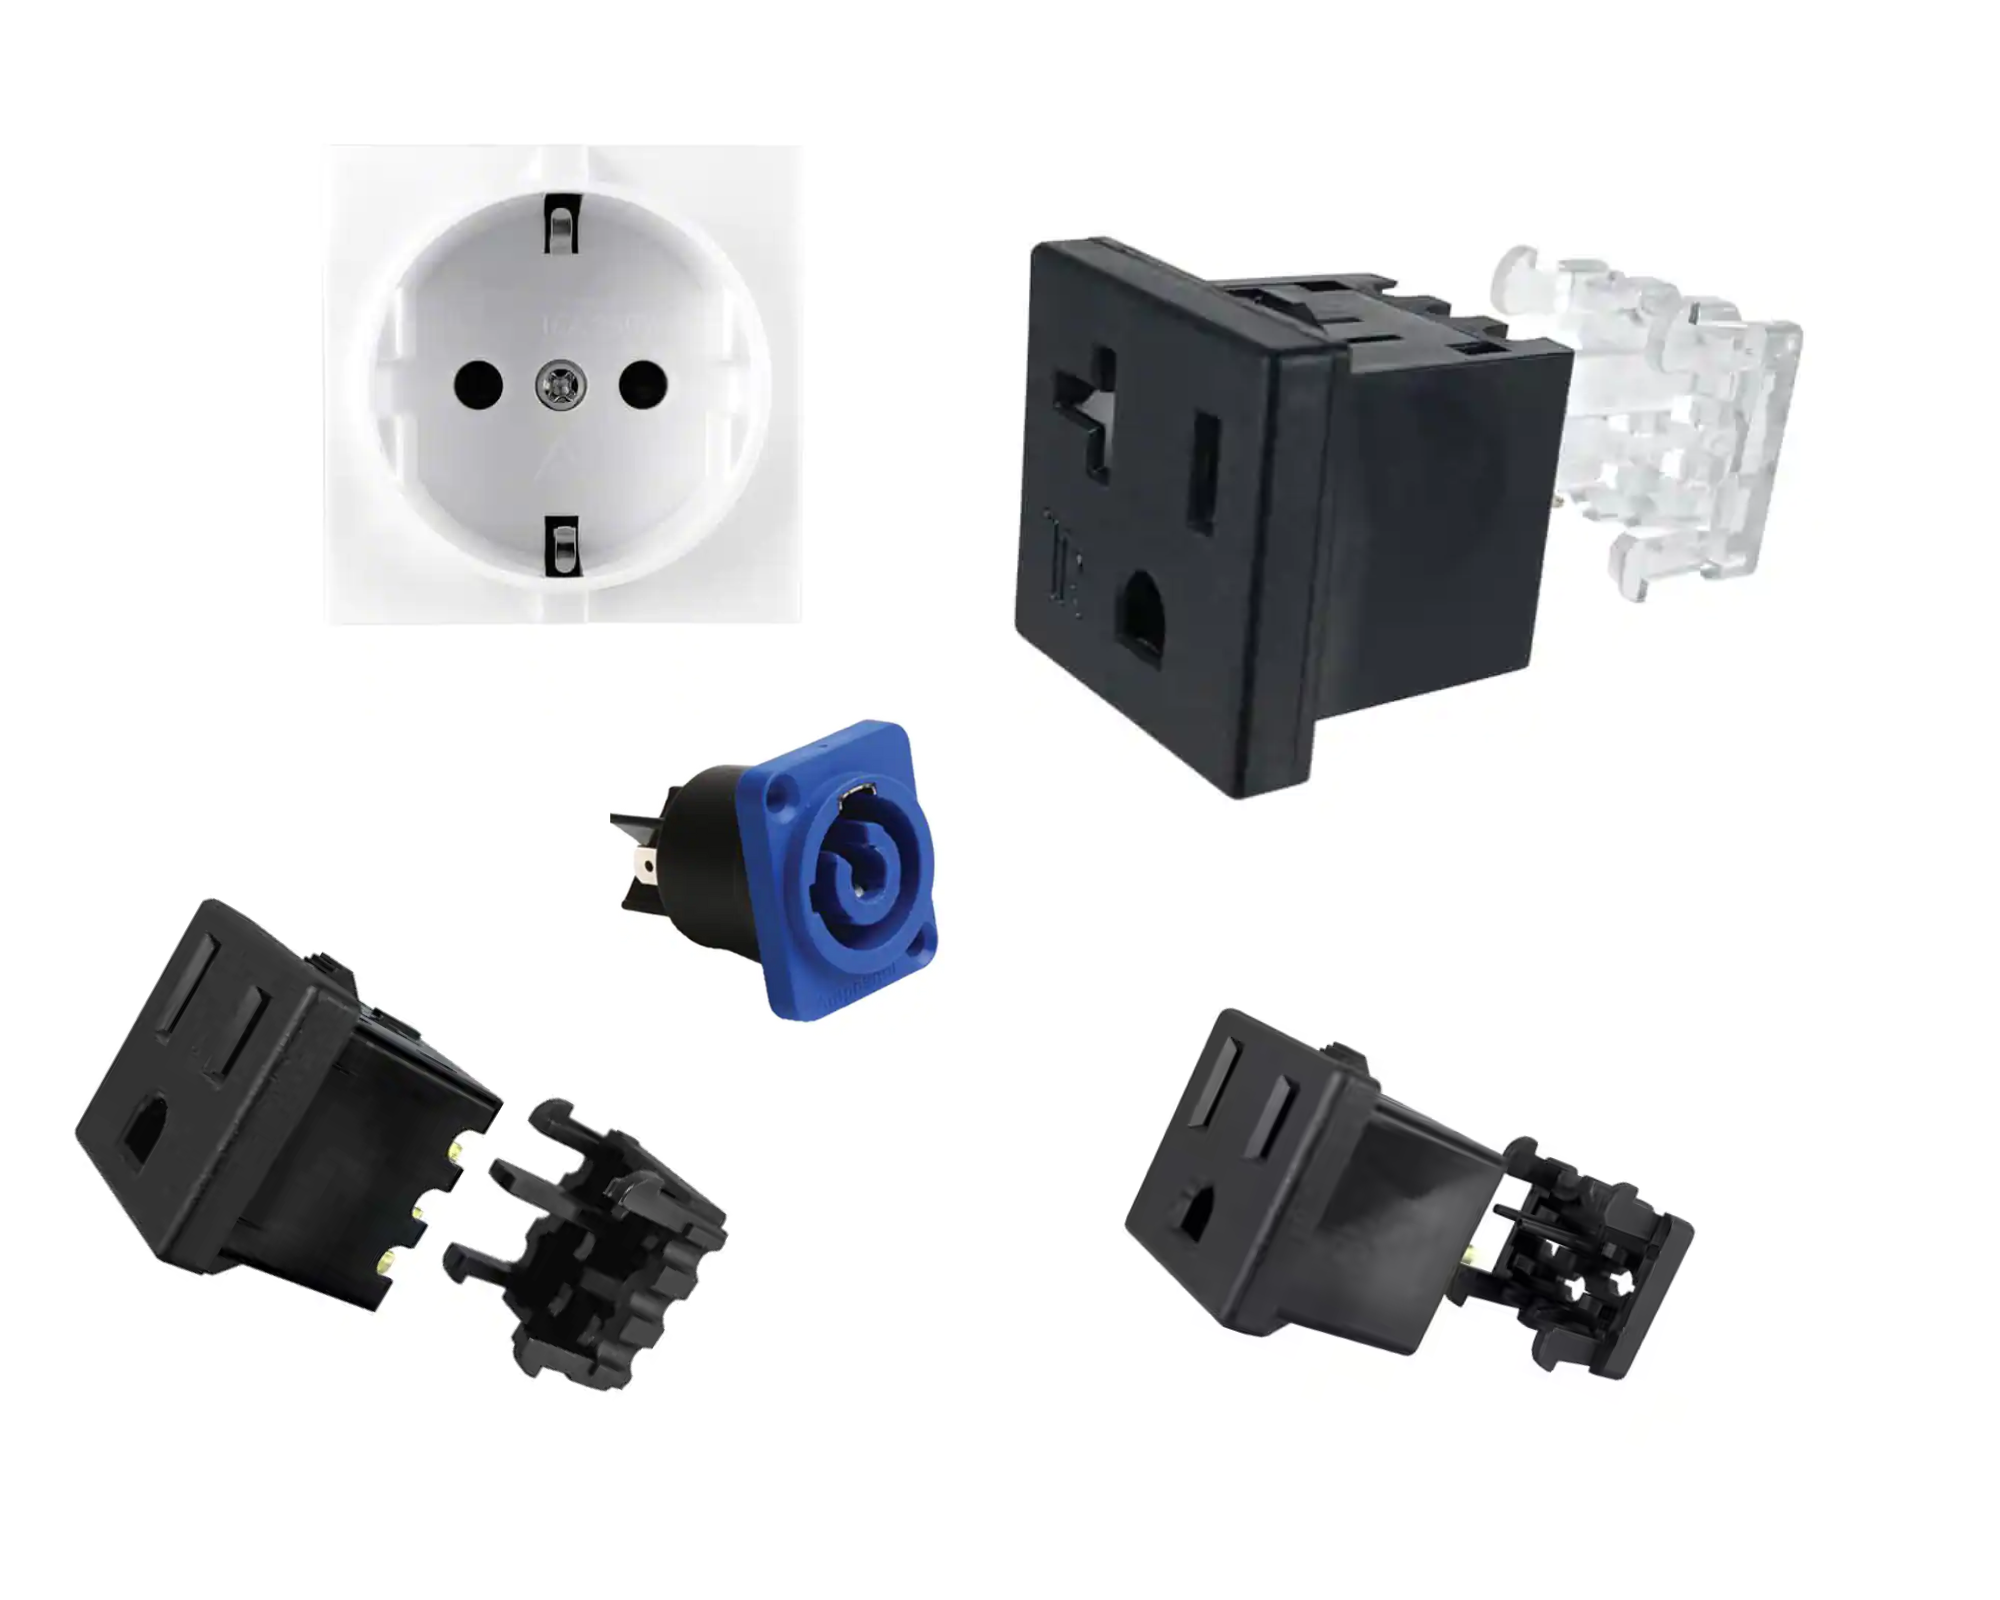 AC Power Connectors - Plugs and Receptacles